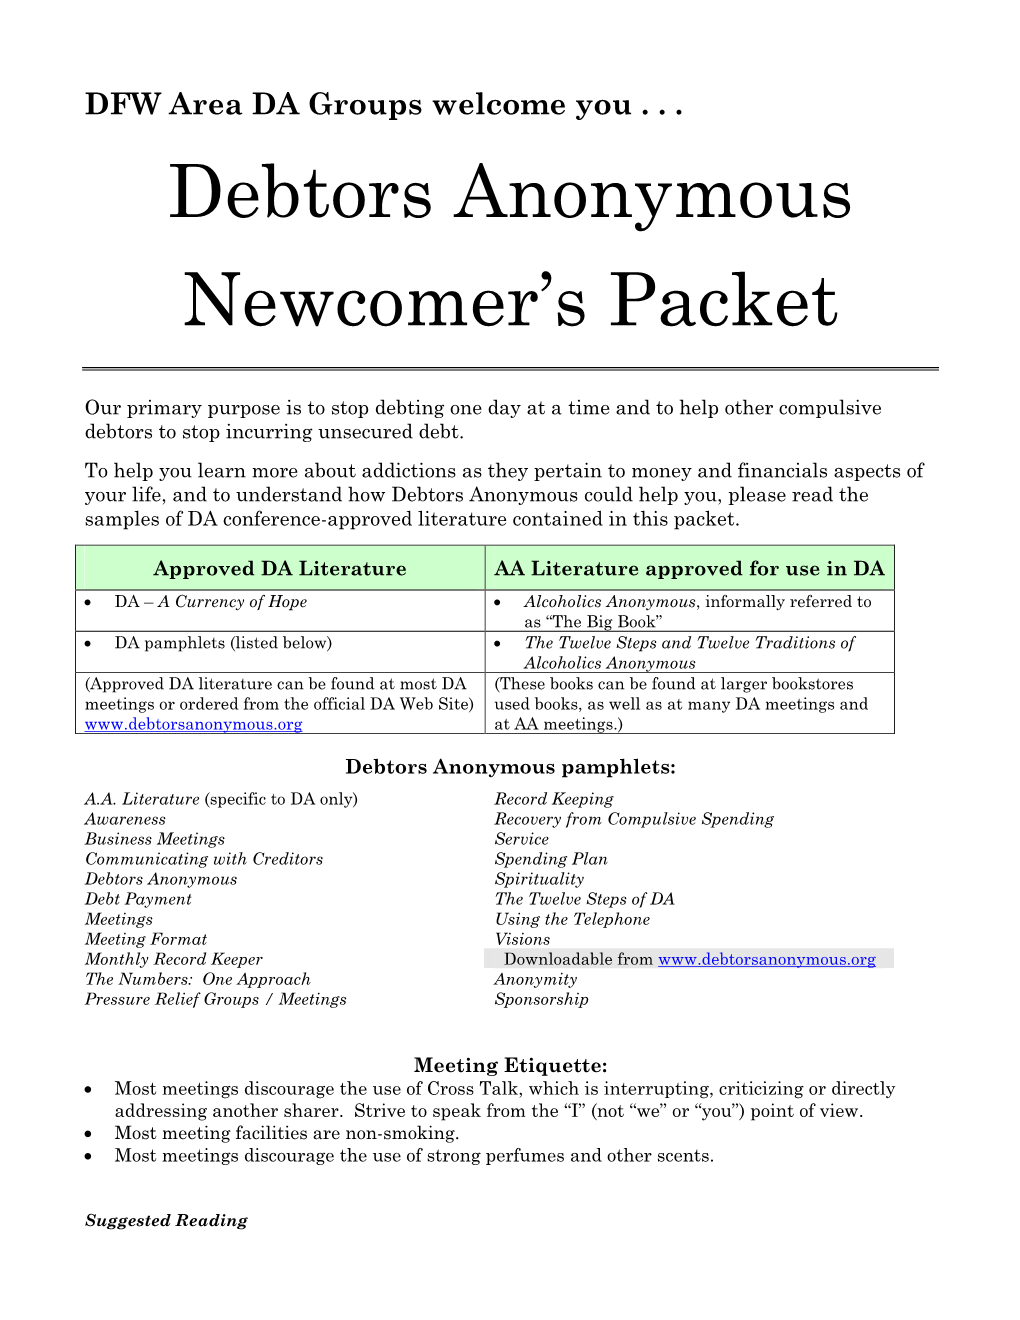 Debtors Anonymous Newcomer's Packet